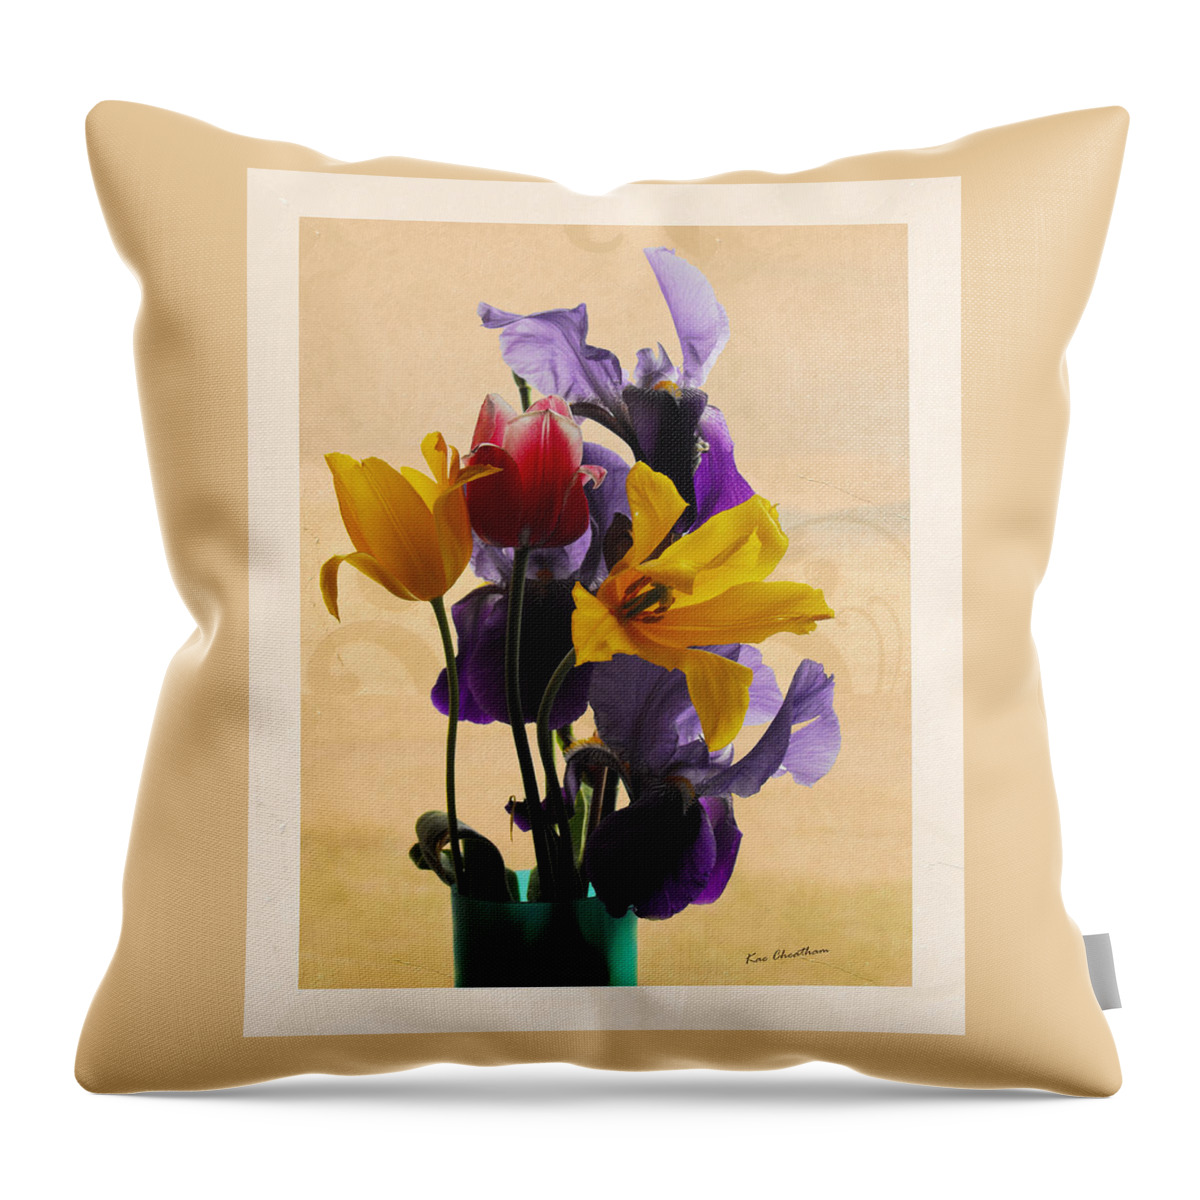 Flowers Throw Pillow featuring the digital art Spring Flowers by Kae Cheatham